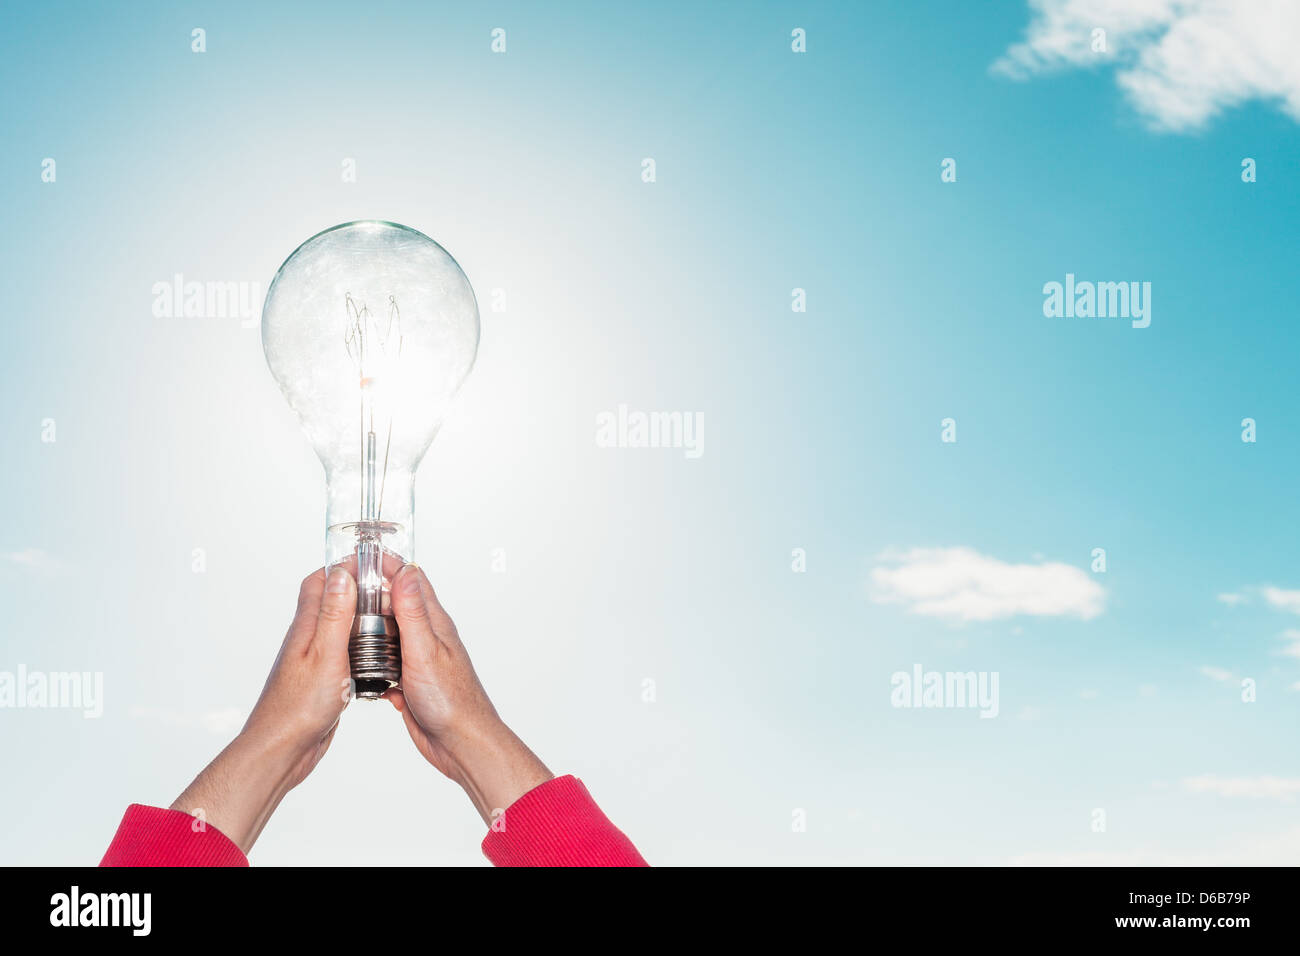 Woman holding Light bulb in sky Banque D'Images